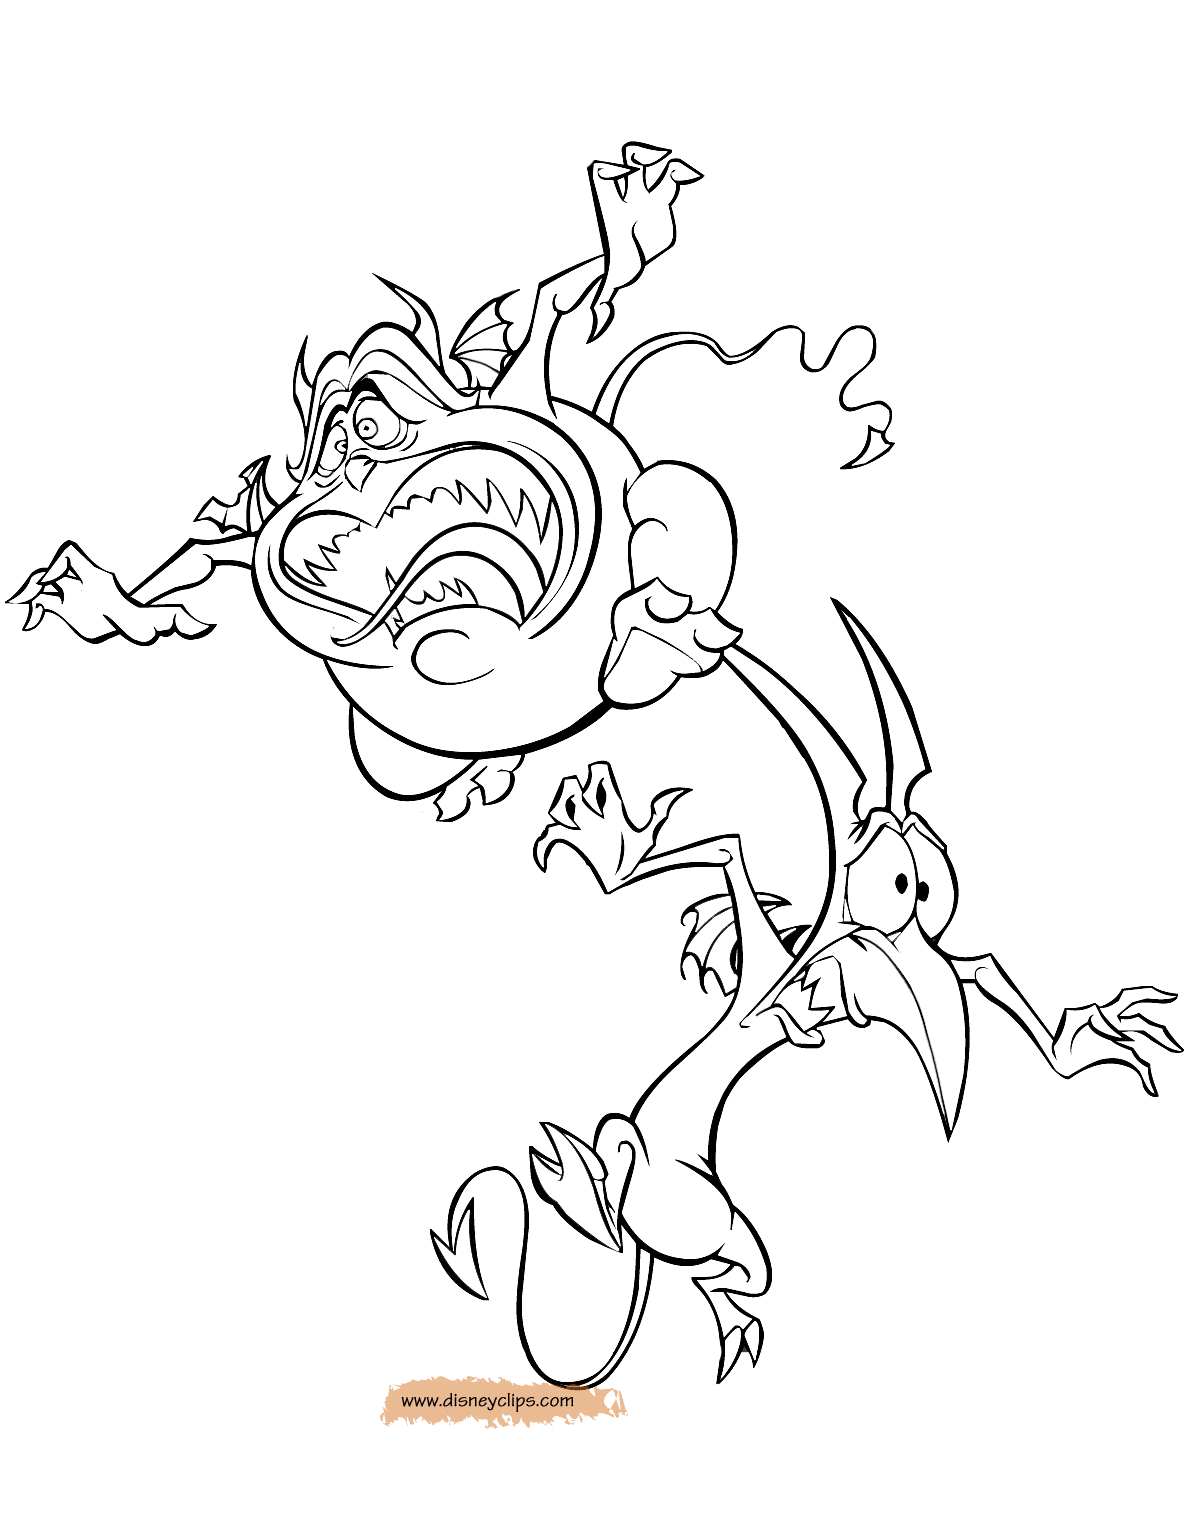 Hercules Coloring Pages 2 Disneyclips Com